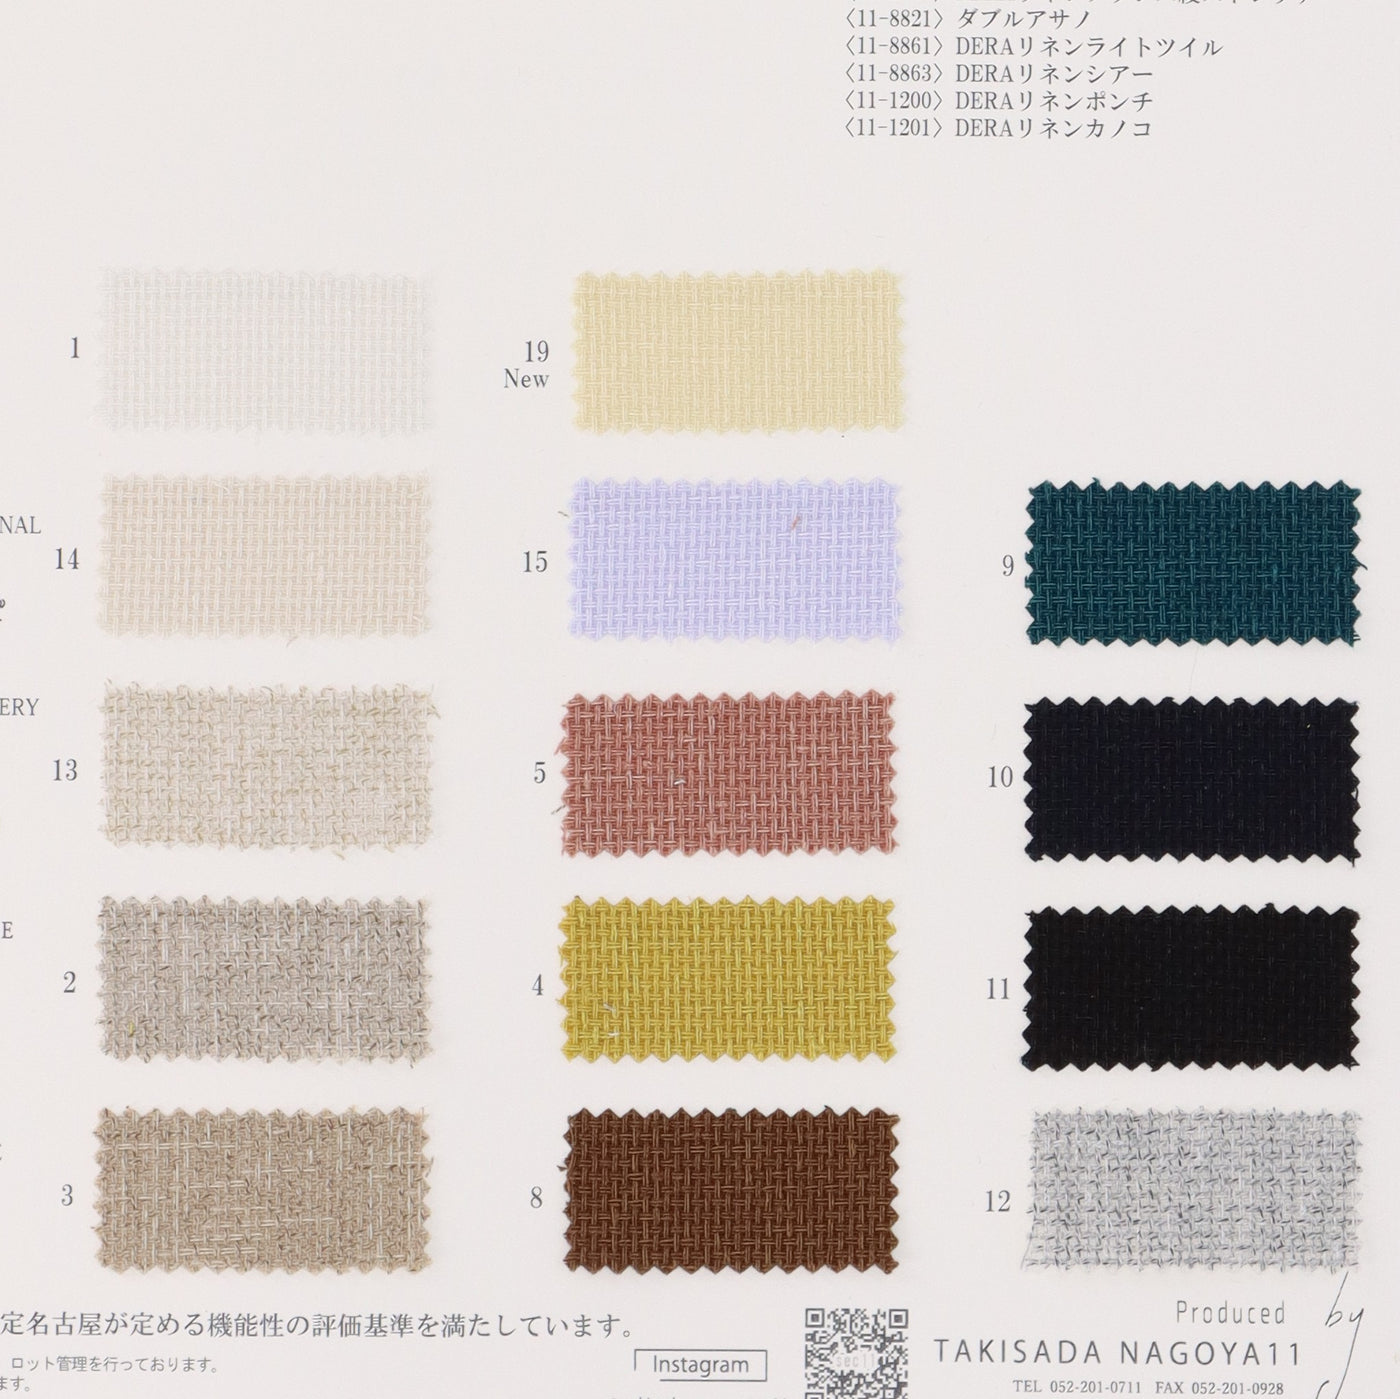 11-8821-swatch_Linen Like Structured Double Weave